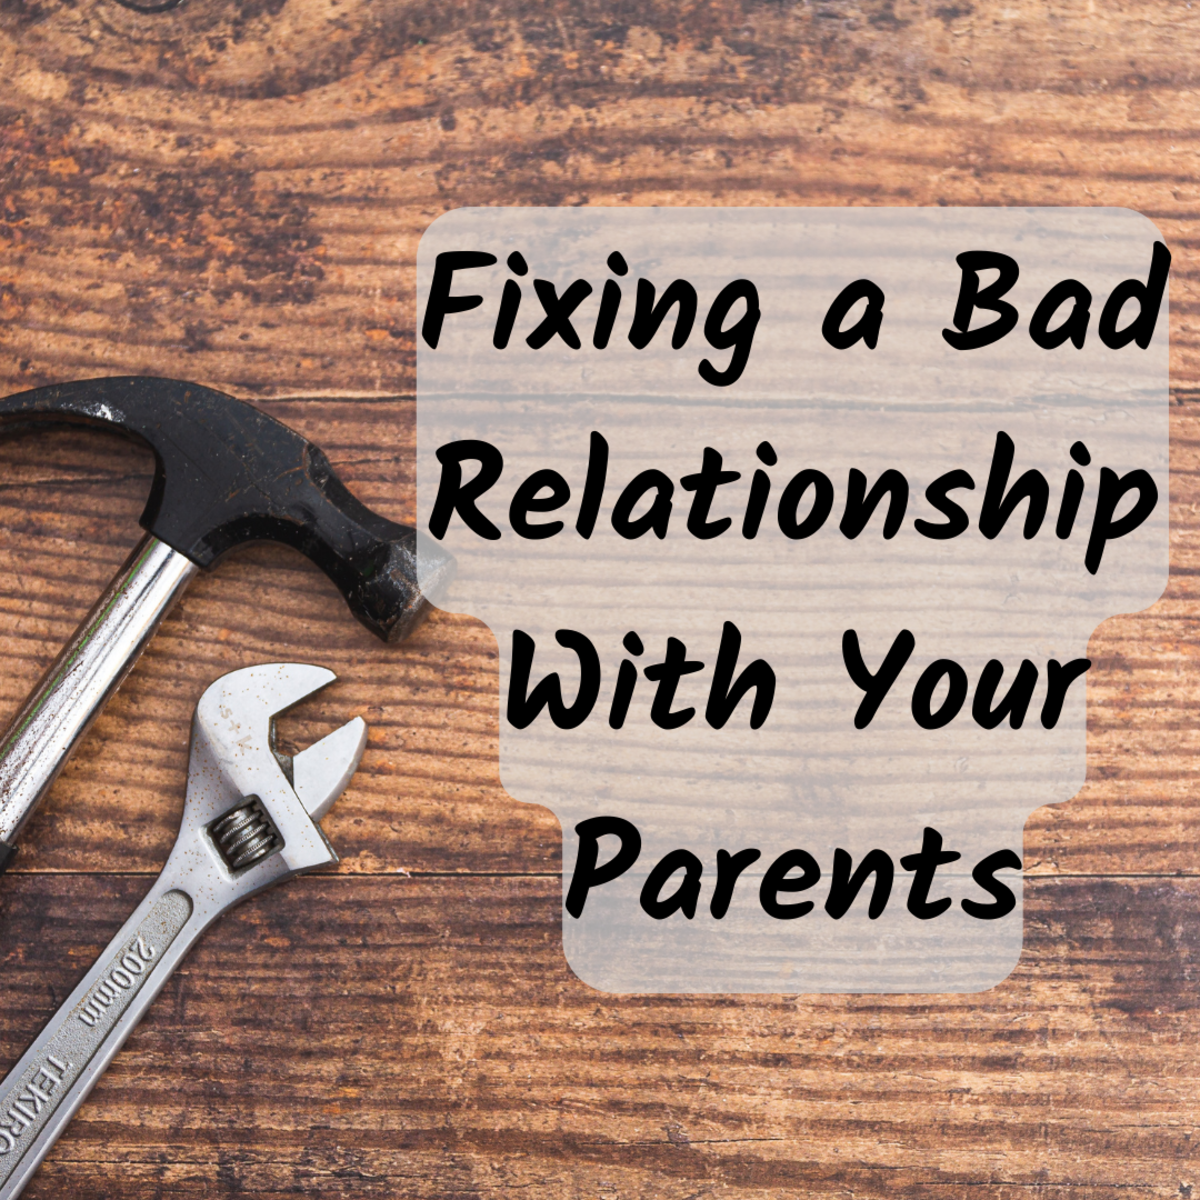 How to Fix a Bad Relationship With Your Parents